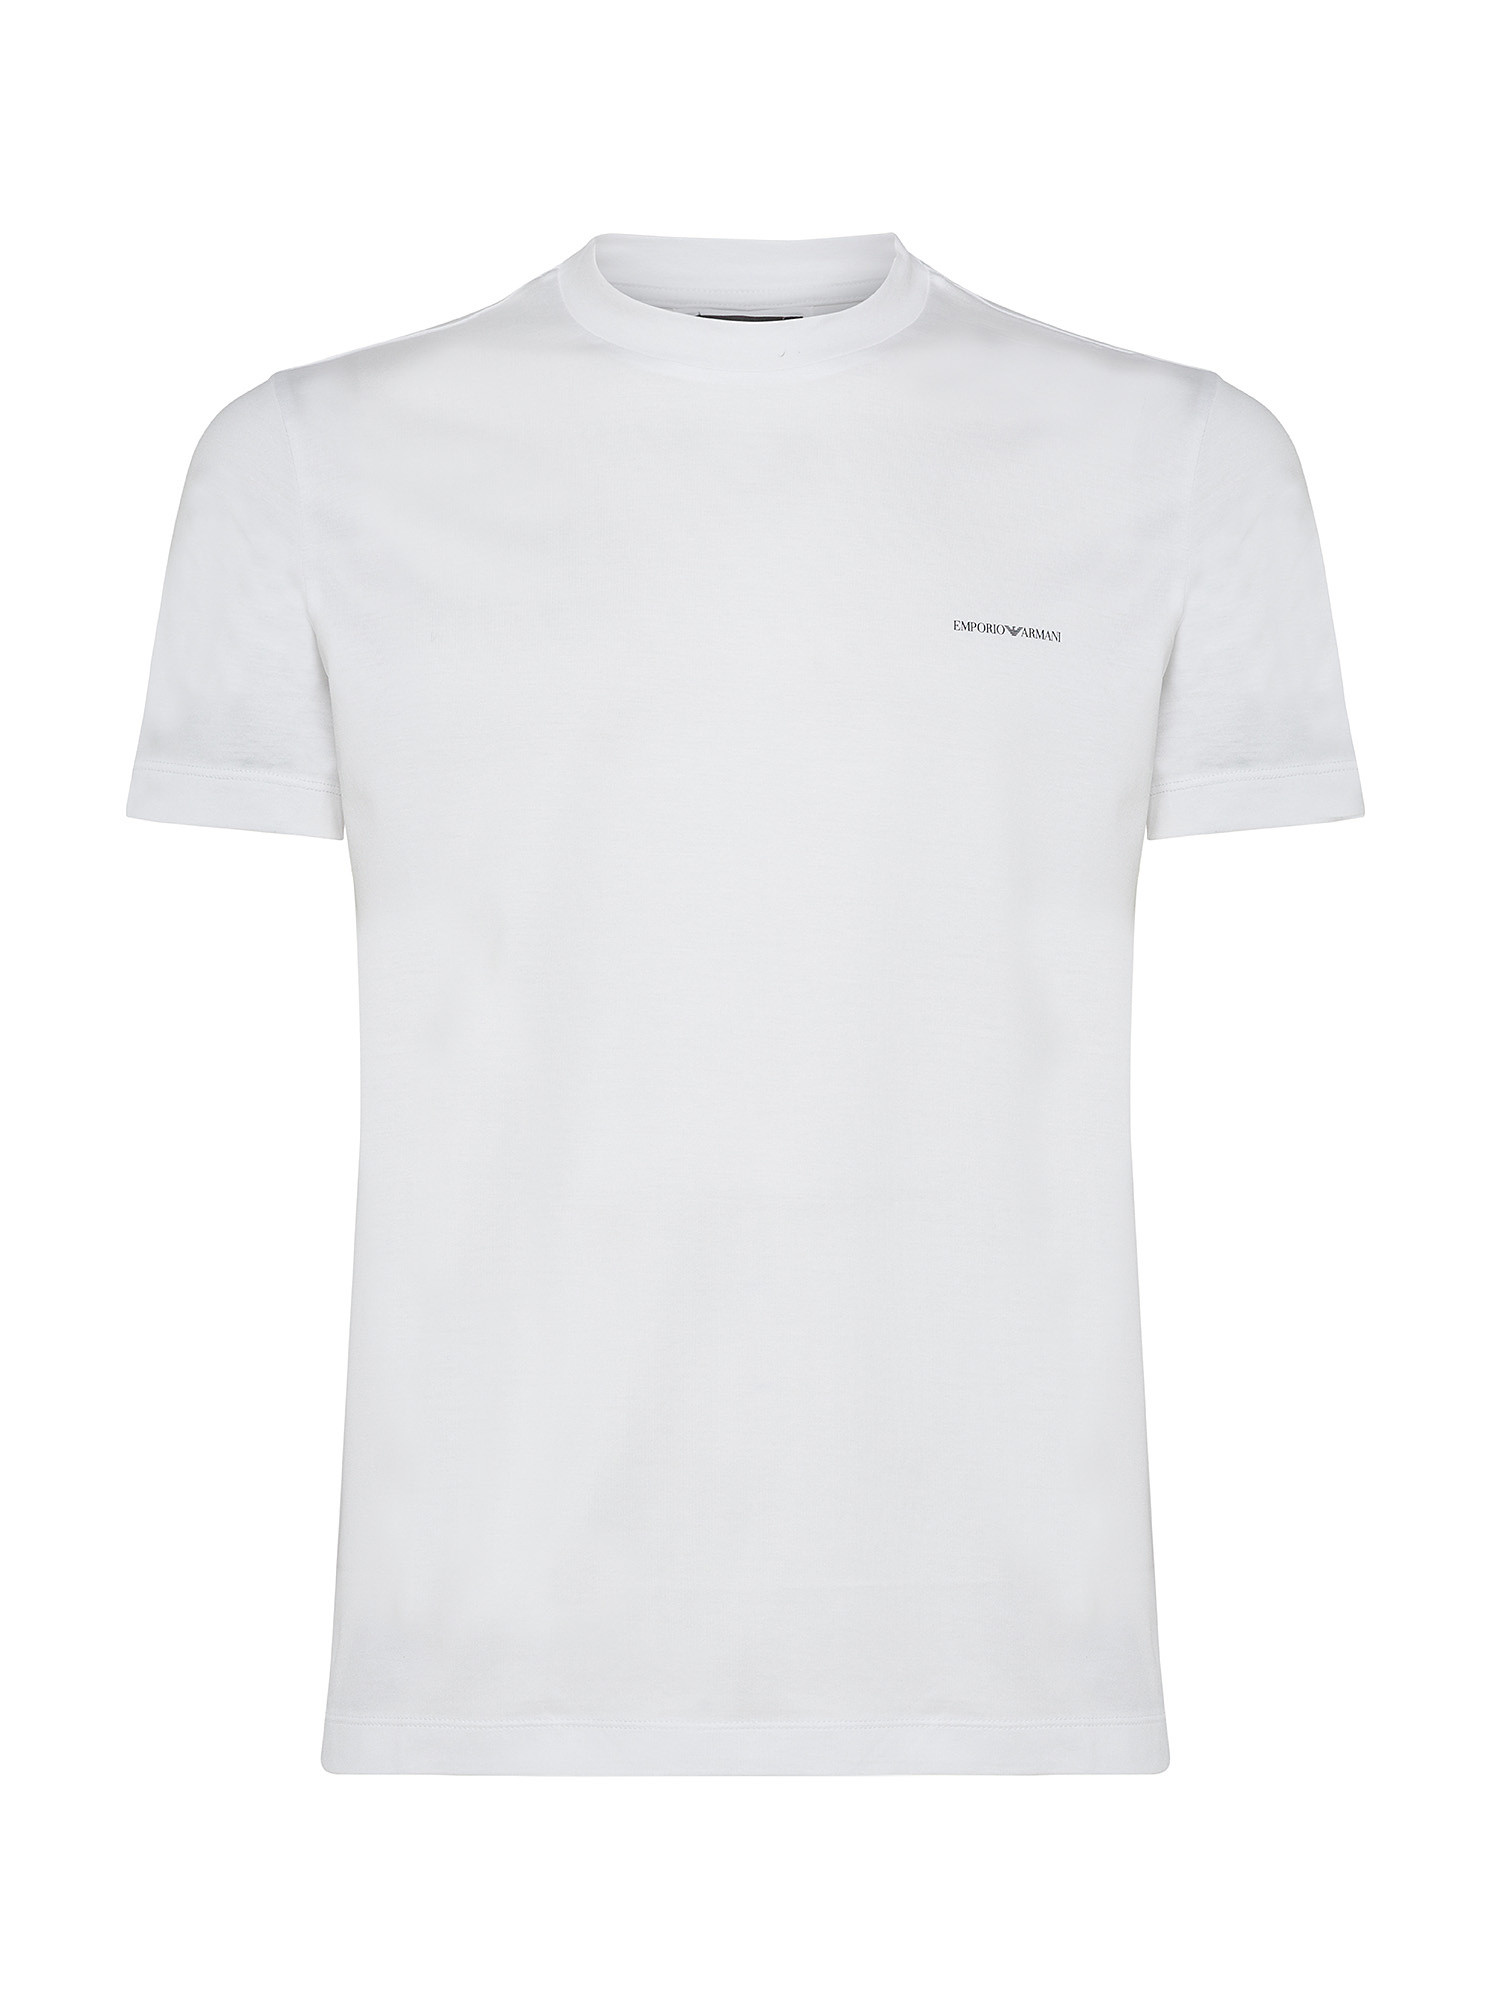 Emporio Armani - T-shirt con logo lettering, Bianco, large image number 0